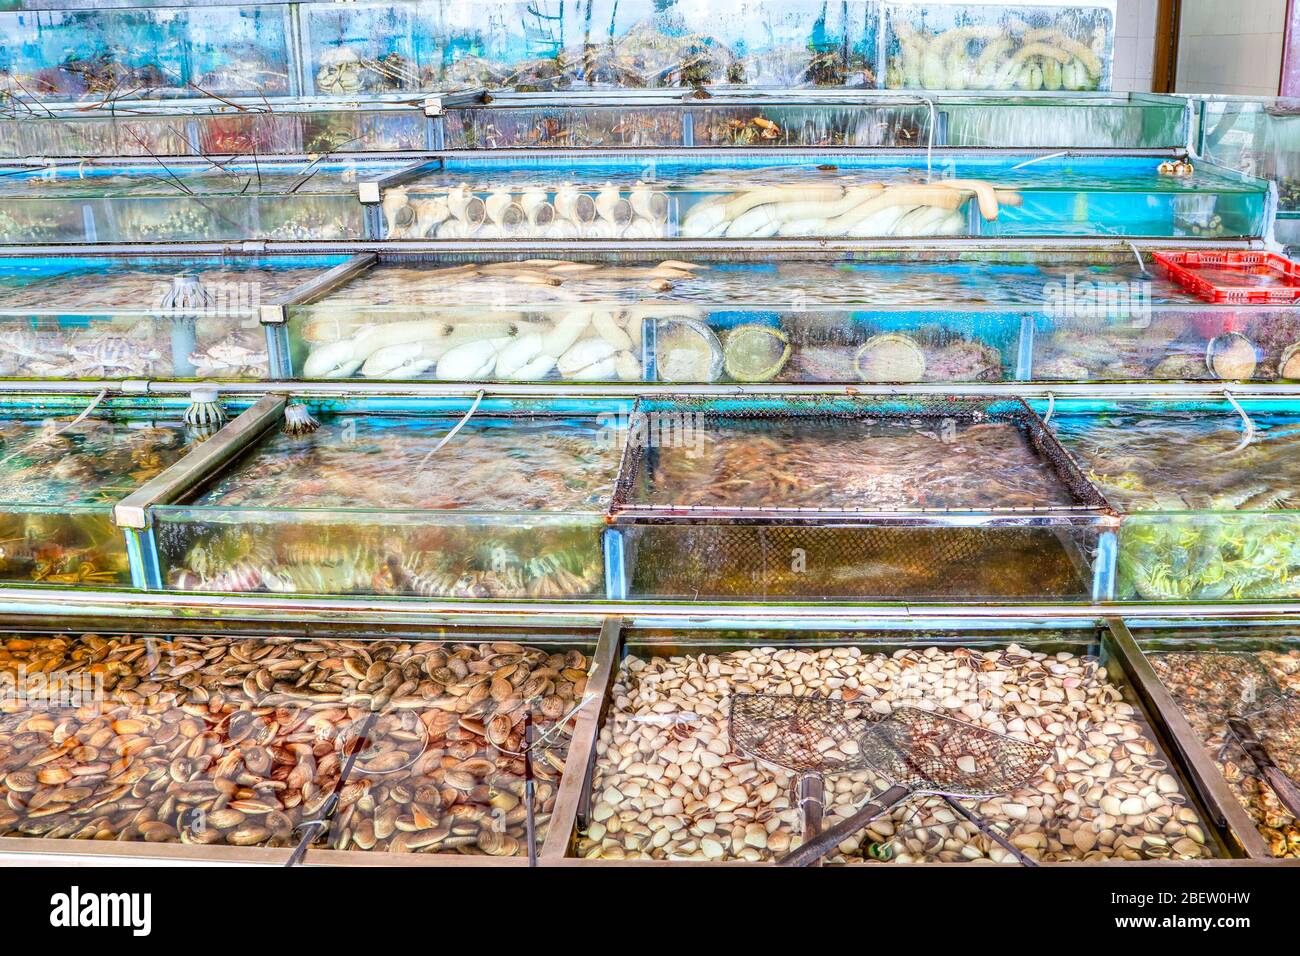 Live fish, lobsters, crabs and other mollusk seafood are crammed into fish tanks at the seafood market in Sai Kung, Hong Kong. Sai Kung village is fam Stock Photo